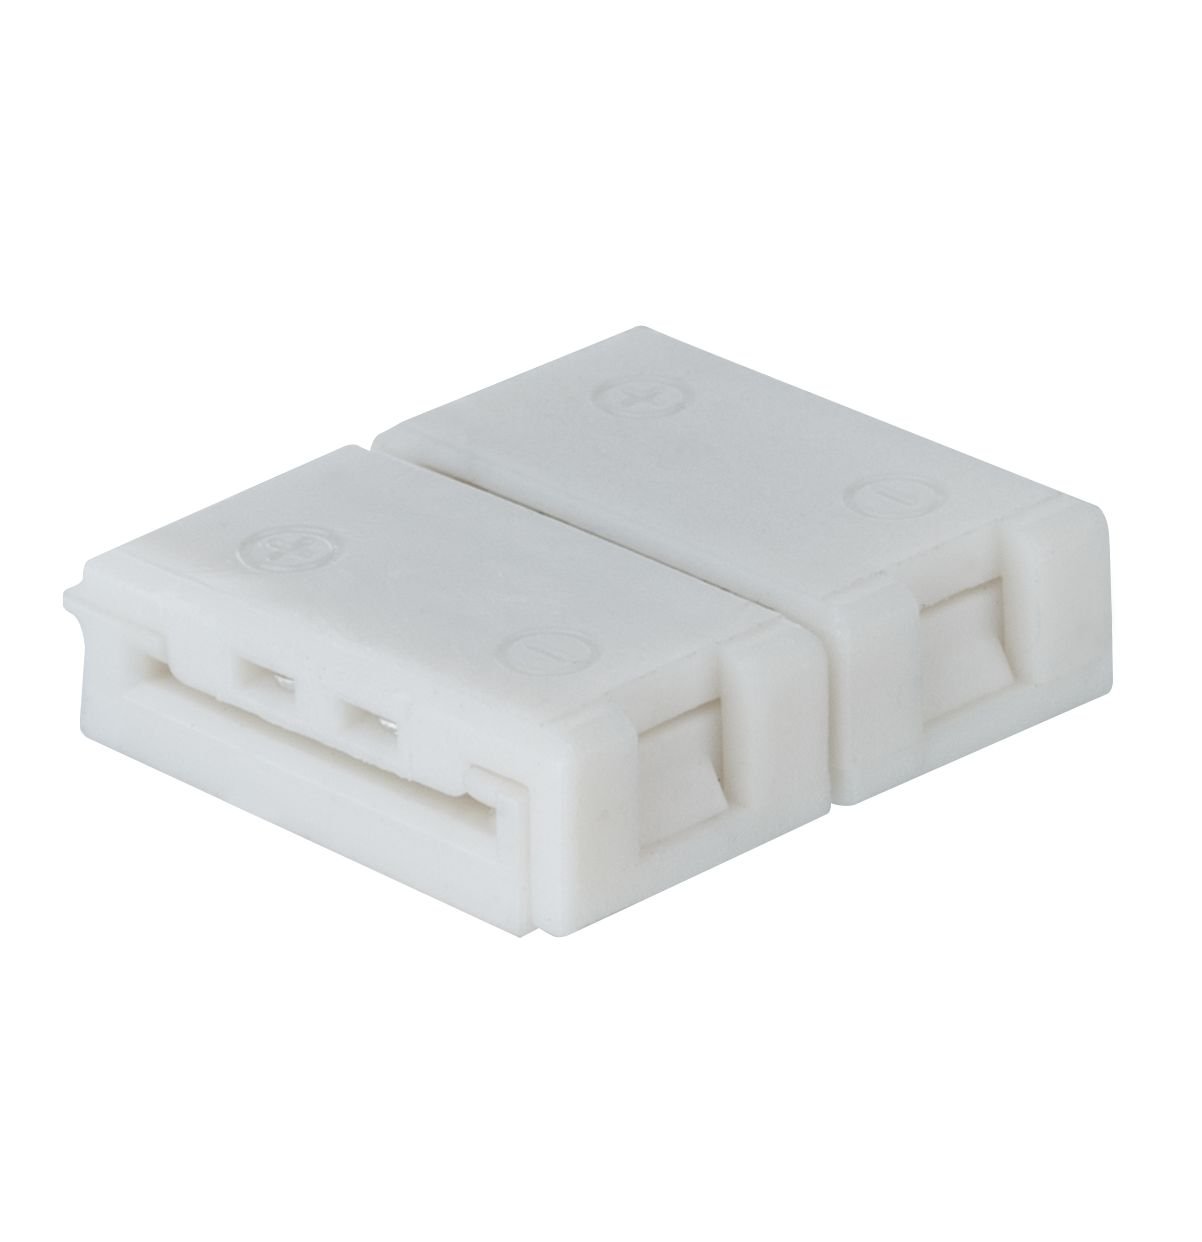 YourLED ECO Connecteur 13,5x14mm max. 60W Blanc